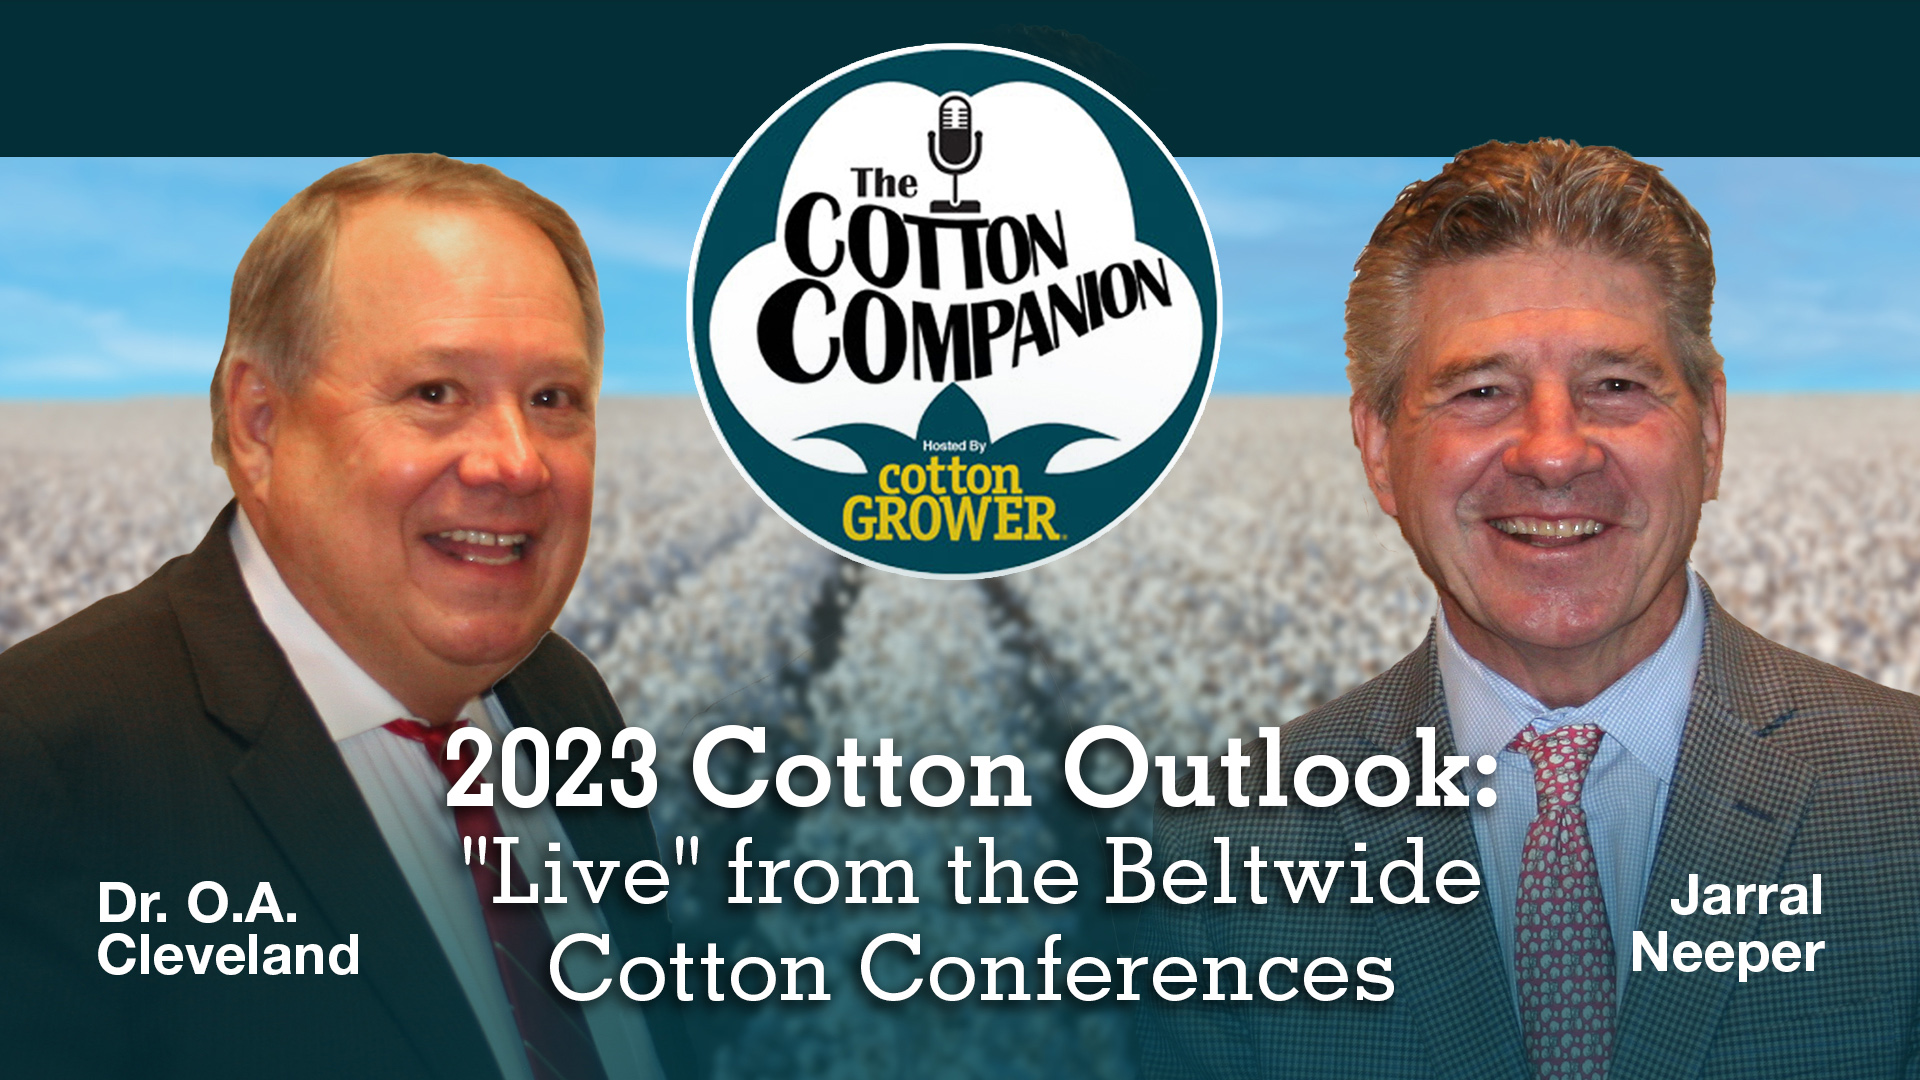 Cotton Companion 2023 Cotton Outlook "Live" from the Beltwide Cotton